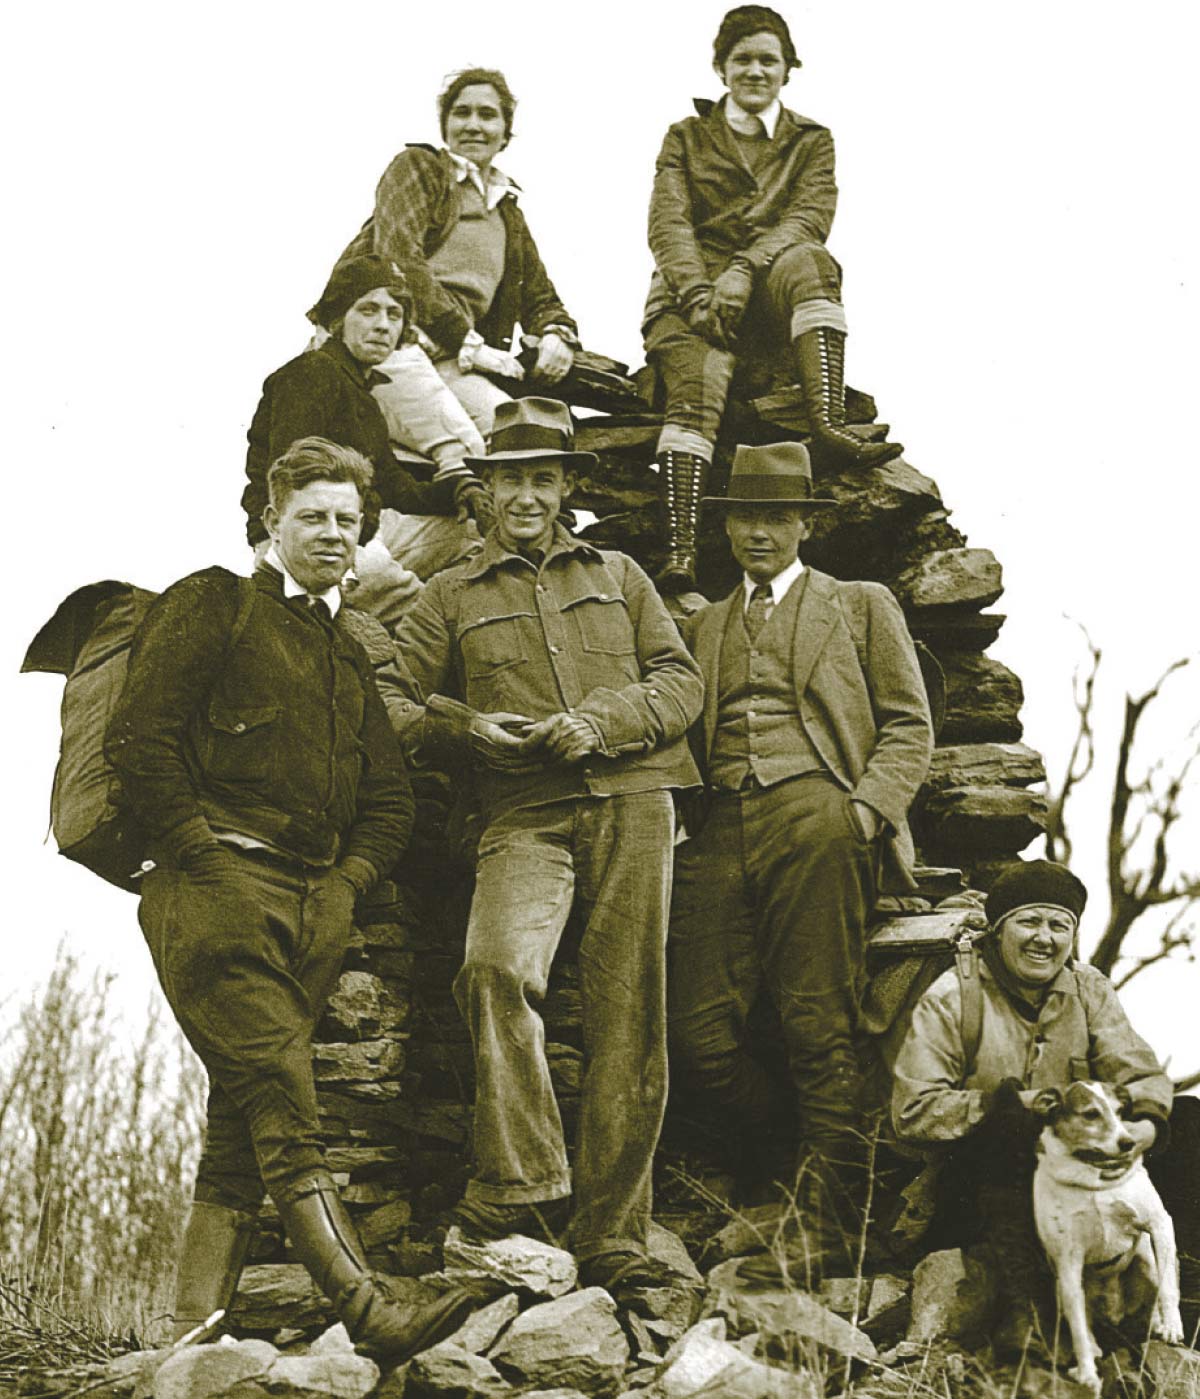 Club members at Hall's Cabin in 1932